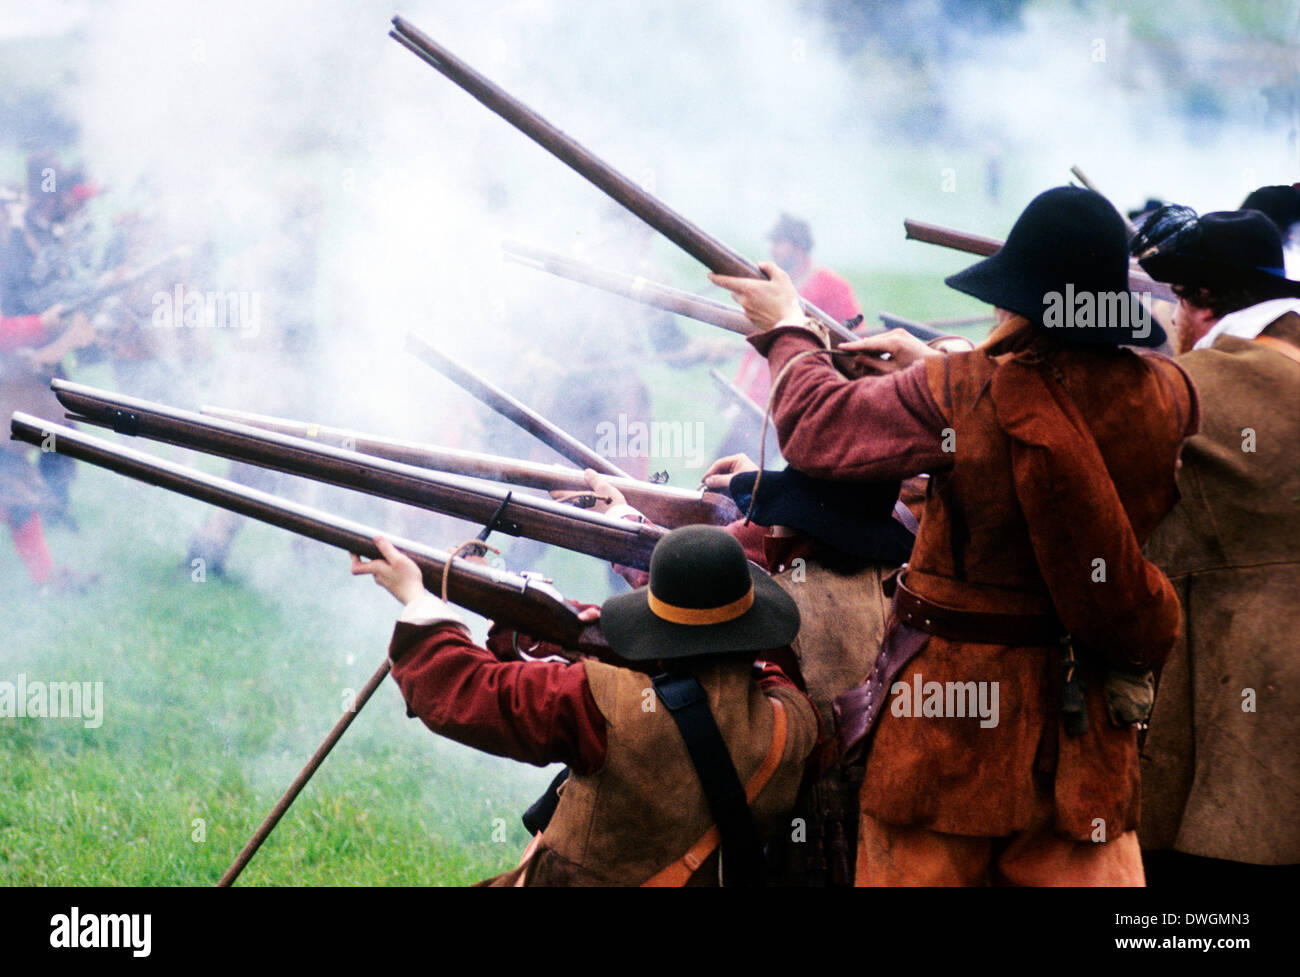 English Civil War, musket fire in battle, 17th century, historical re-enactment of Battle of Naseby soldier soldiers firing muskets gun smoke military uniform uniforms England UK Stock Photo